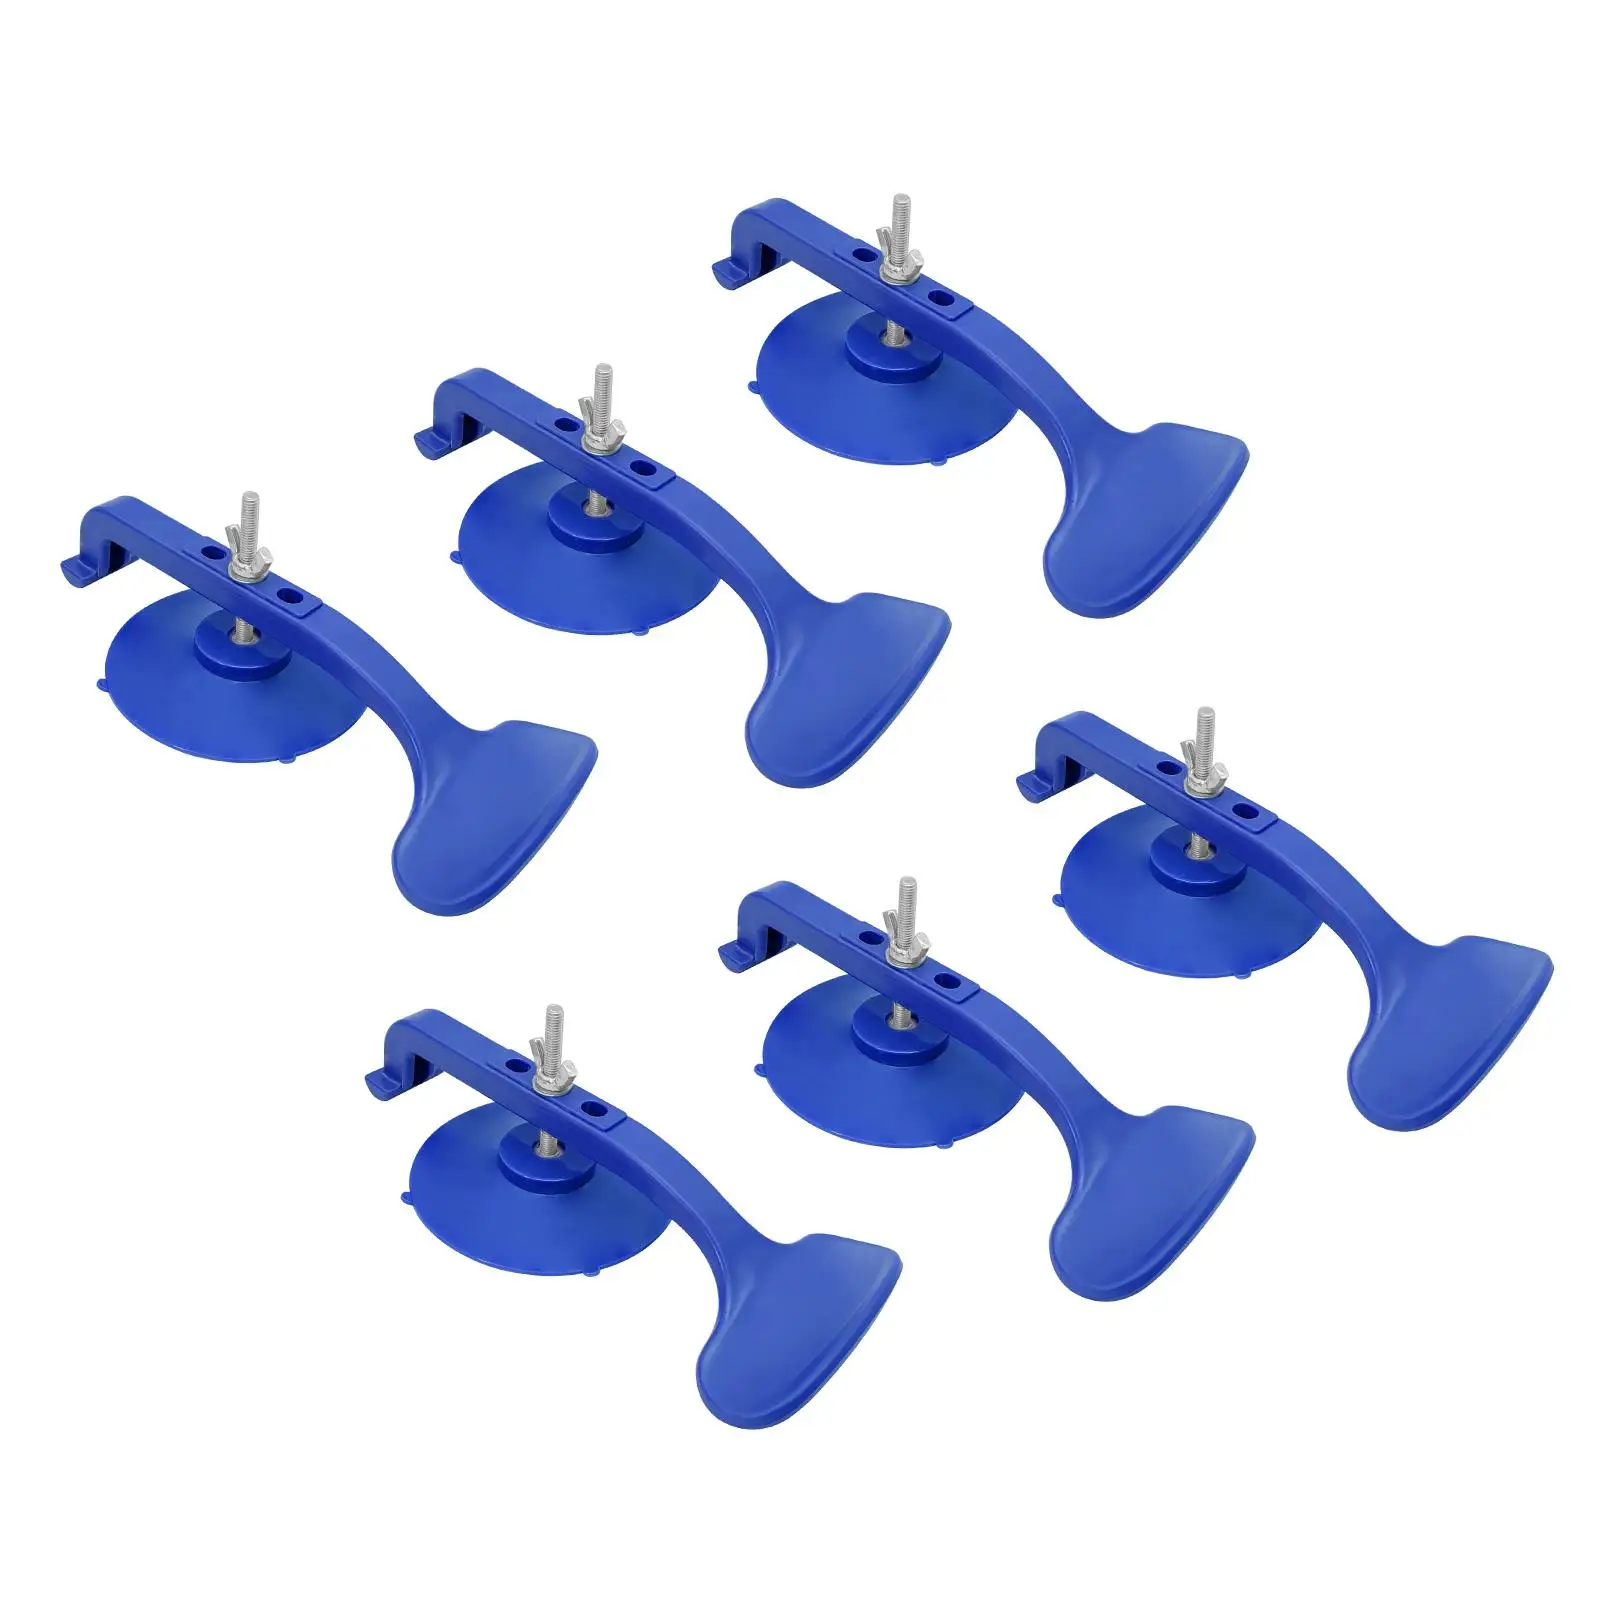 6Pcs High Quality Suction Clamp Set for Convertible Glass Windshield Repair Suction Cup Clamps Easy to Operate Quick Release